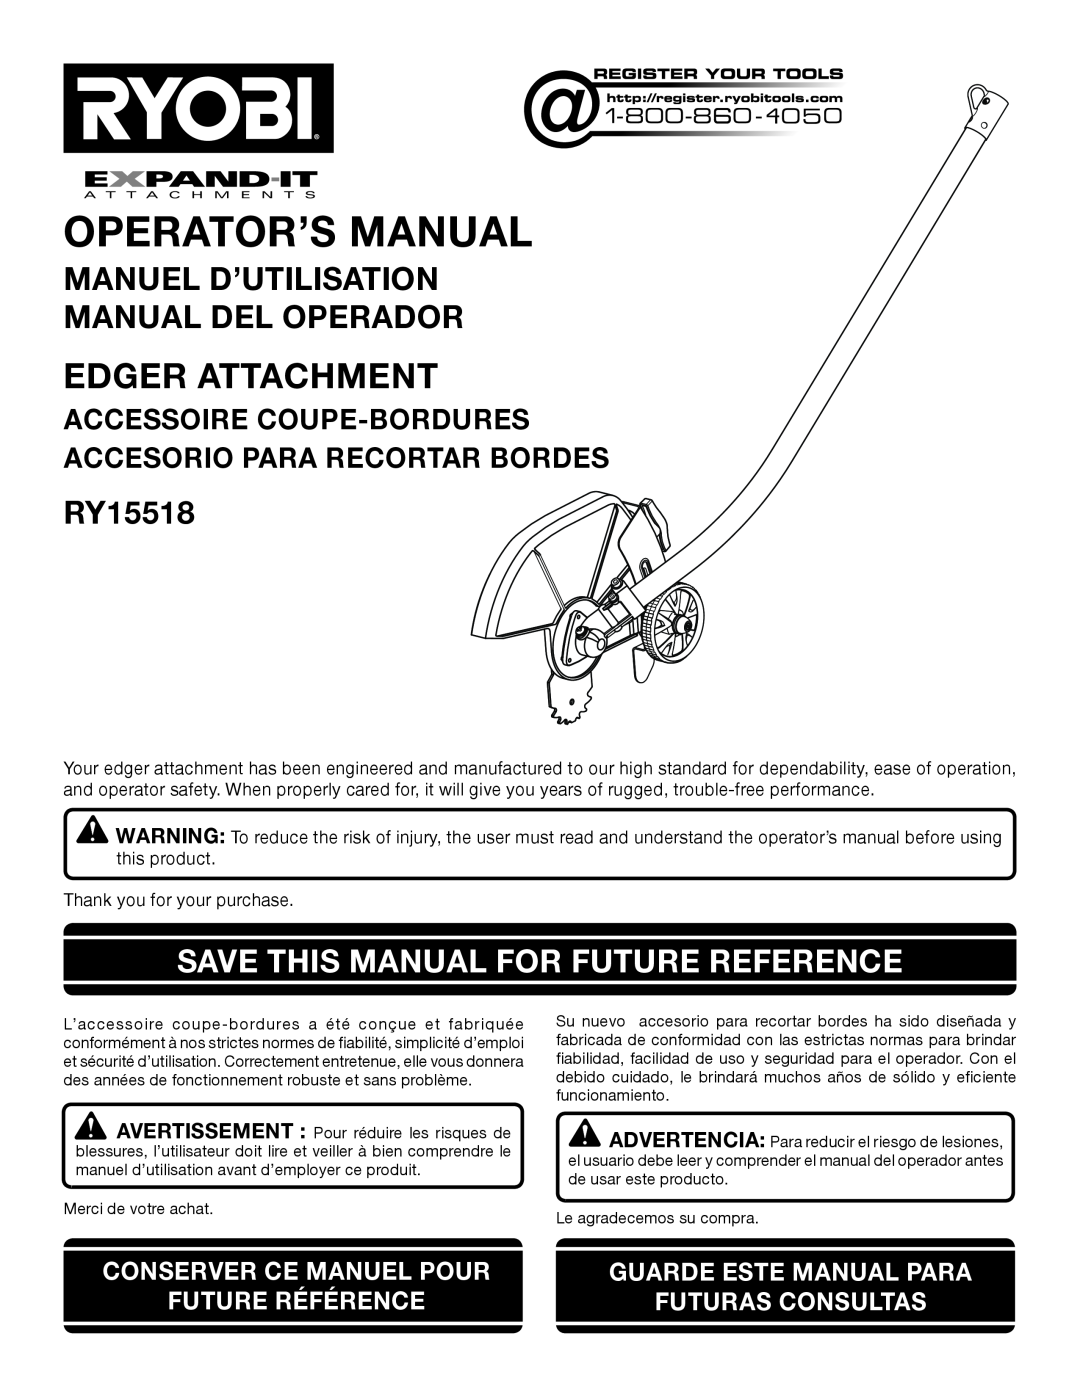 Ryobi RY15518 manuel dutilisation Save This Manual For Future Reference, Accessoire Coupe-Bordures, Operator’S Manual 